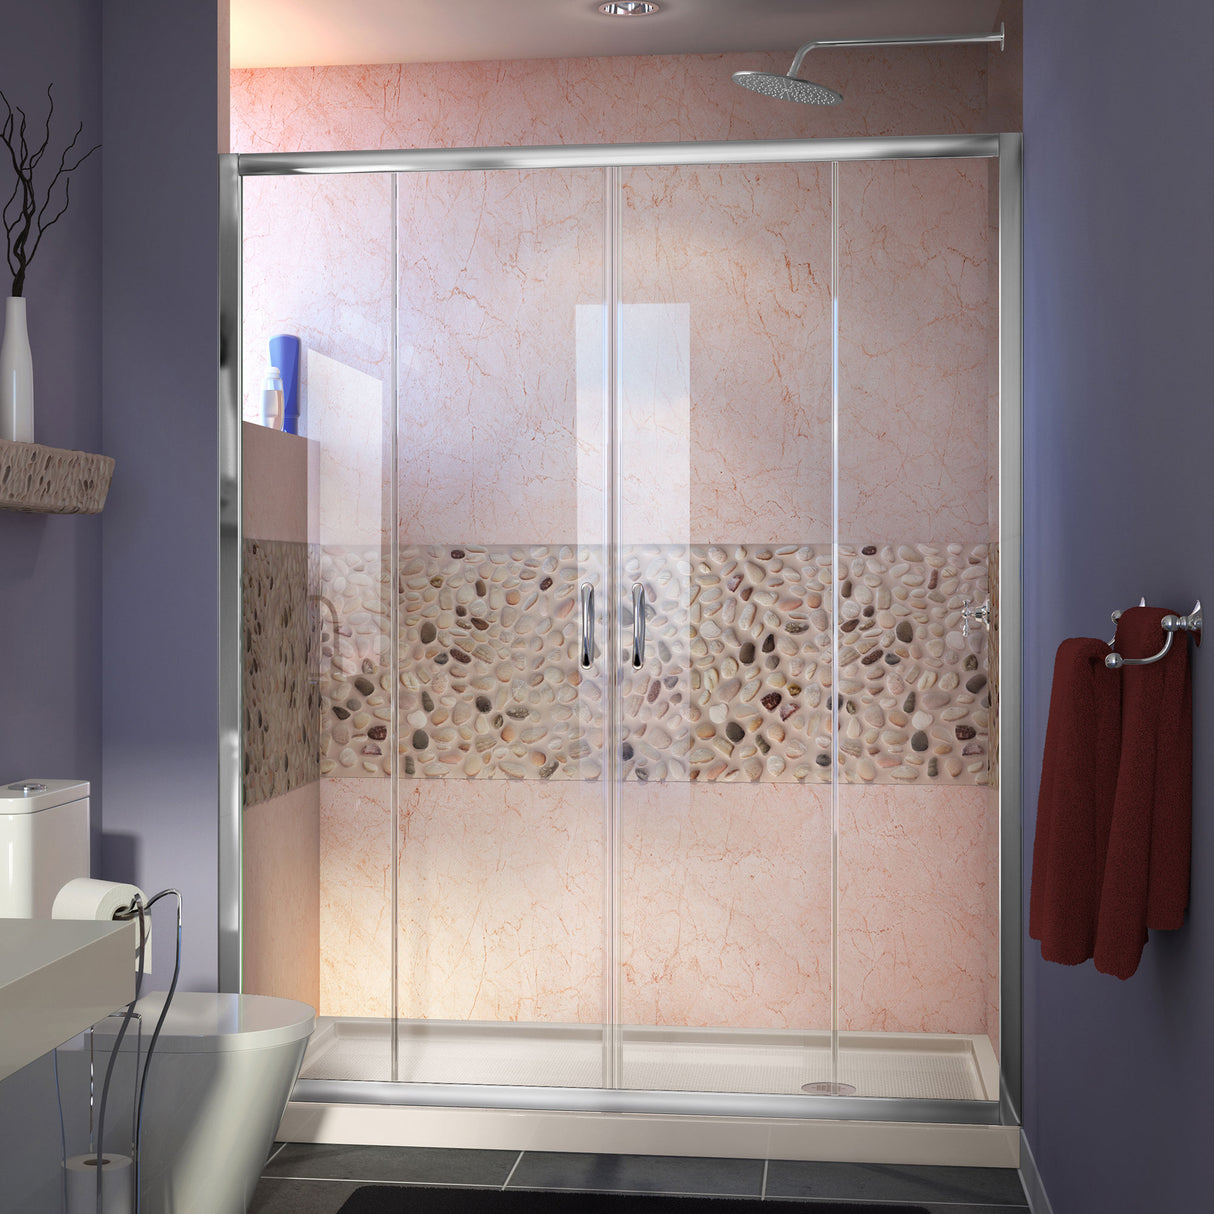 DreamLine Visions 30 in. D x 60 in. W x 74 3/4 in. H Sliding Shower Door in Chrome with Right Drain Biscuit Shower Base